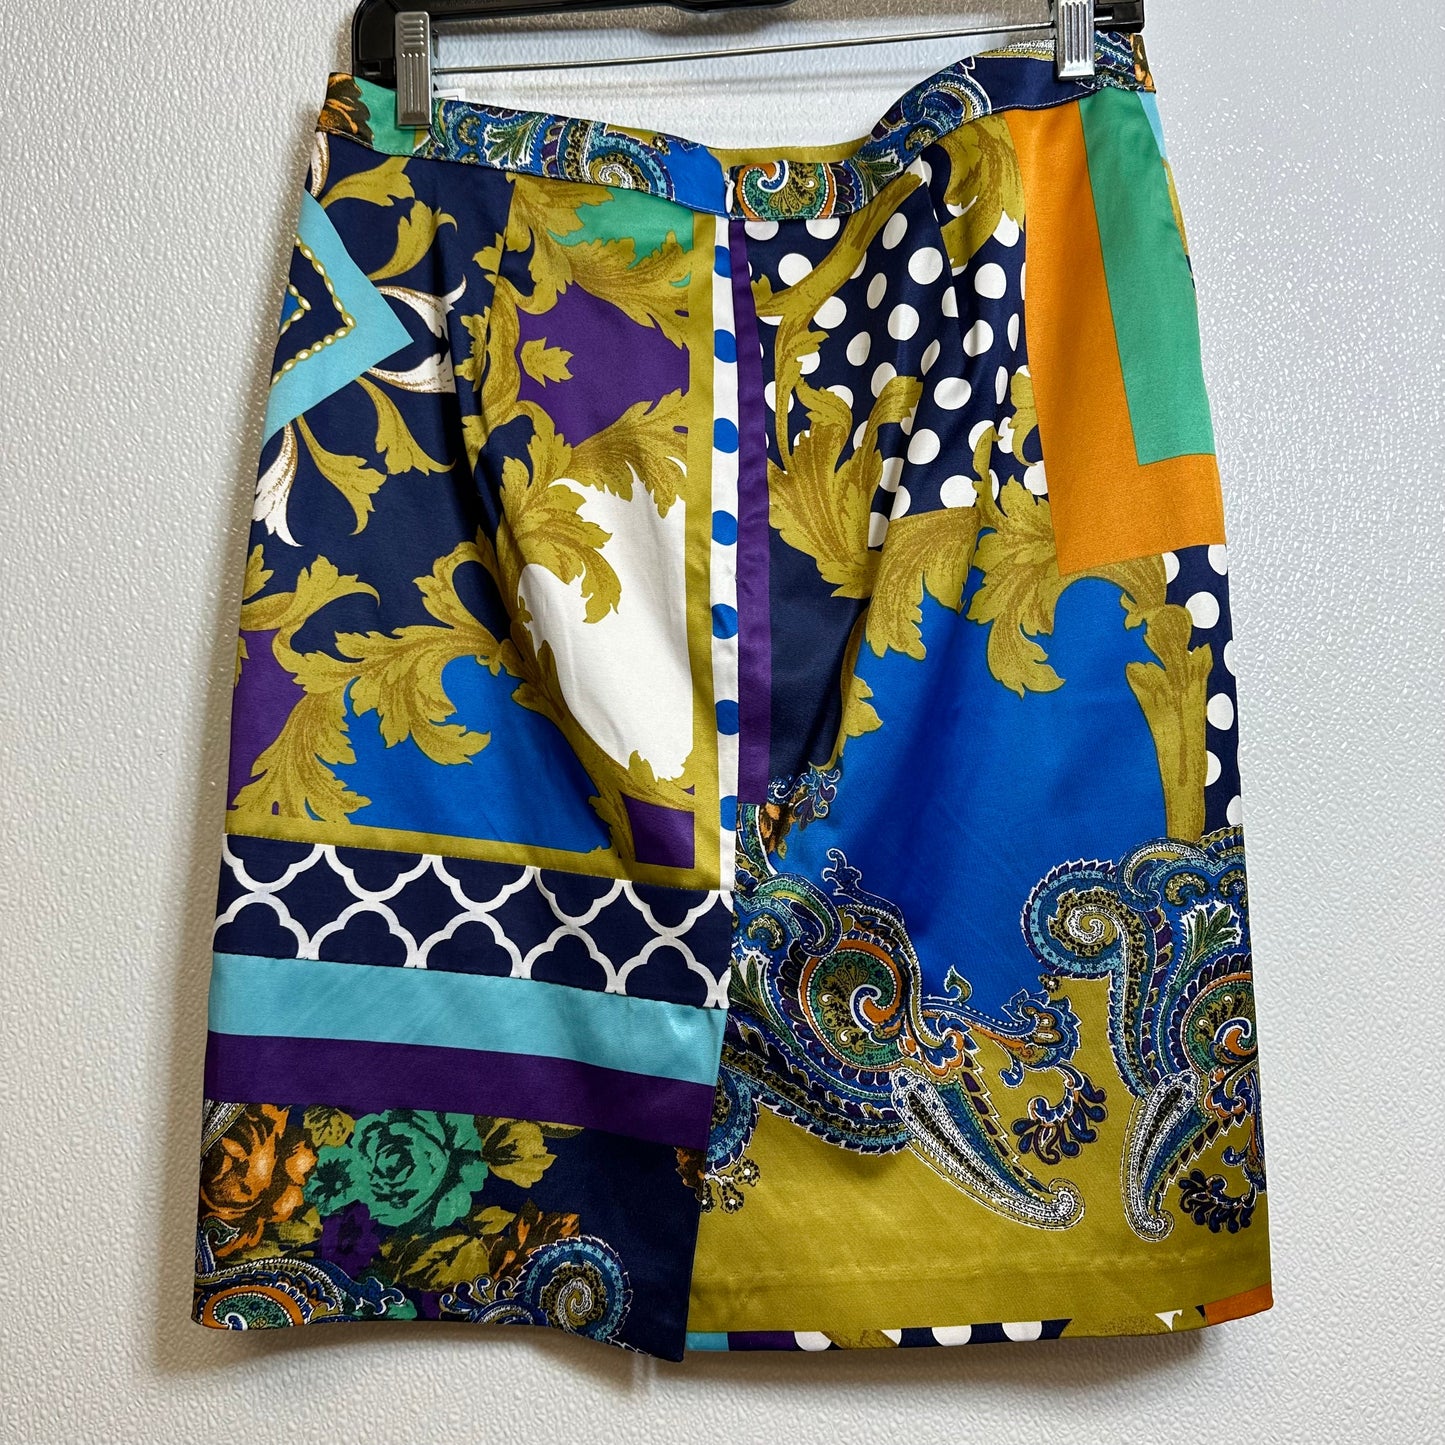 Skirt Mini & Short By Clothes Mentor  Size: 8